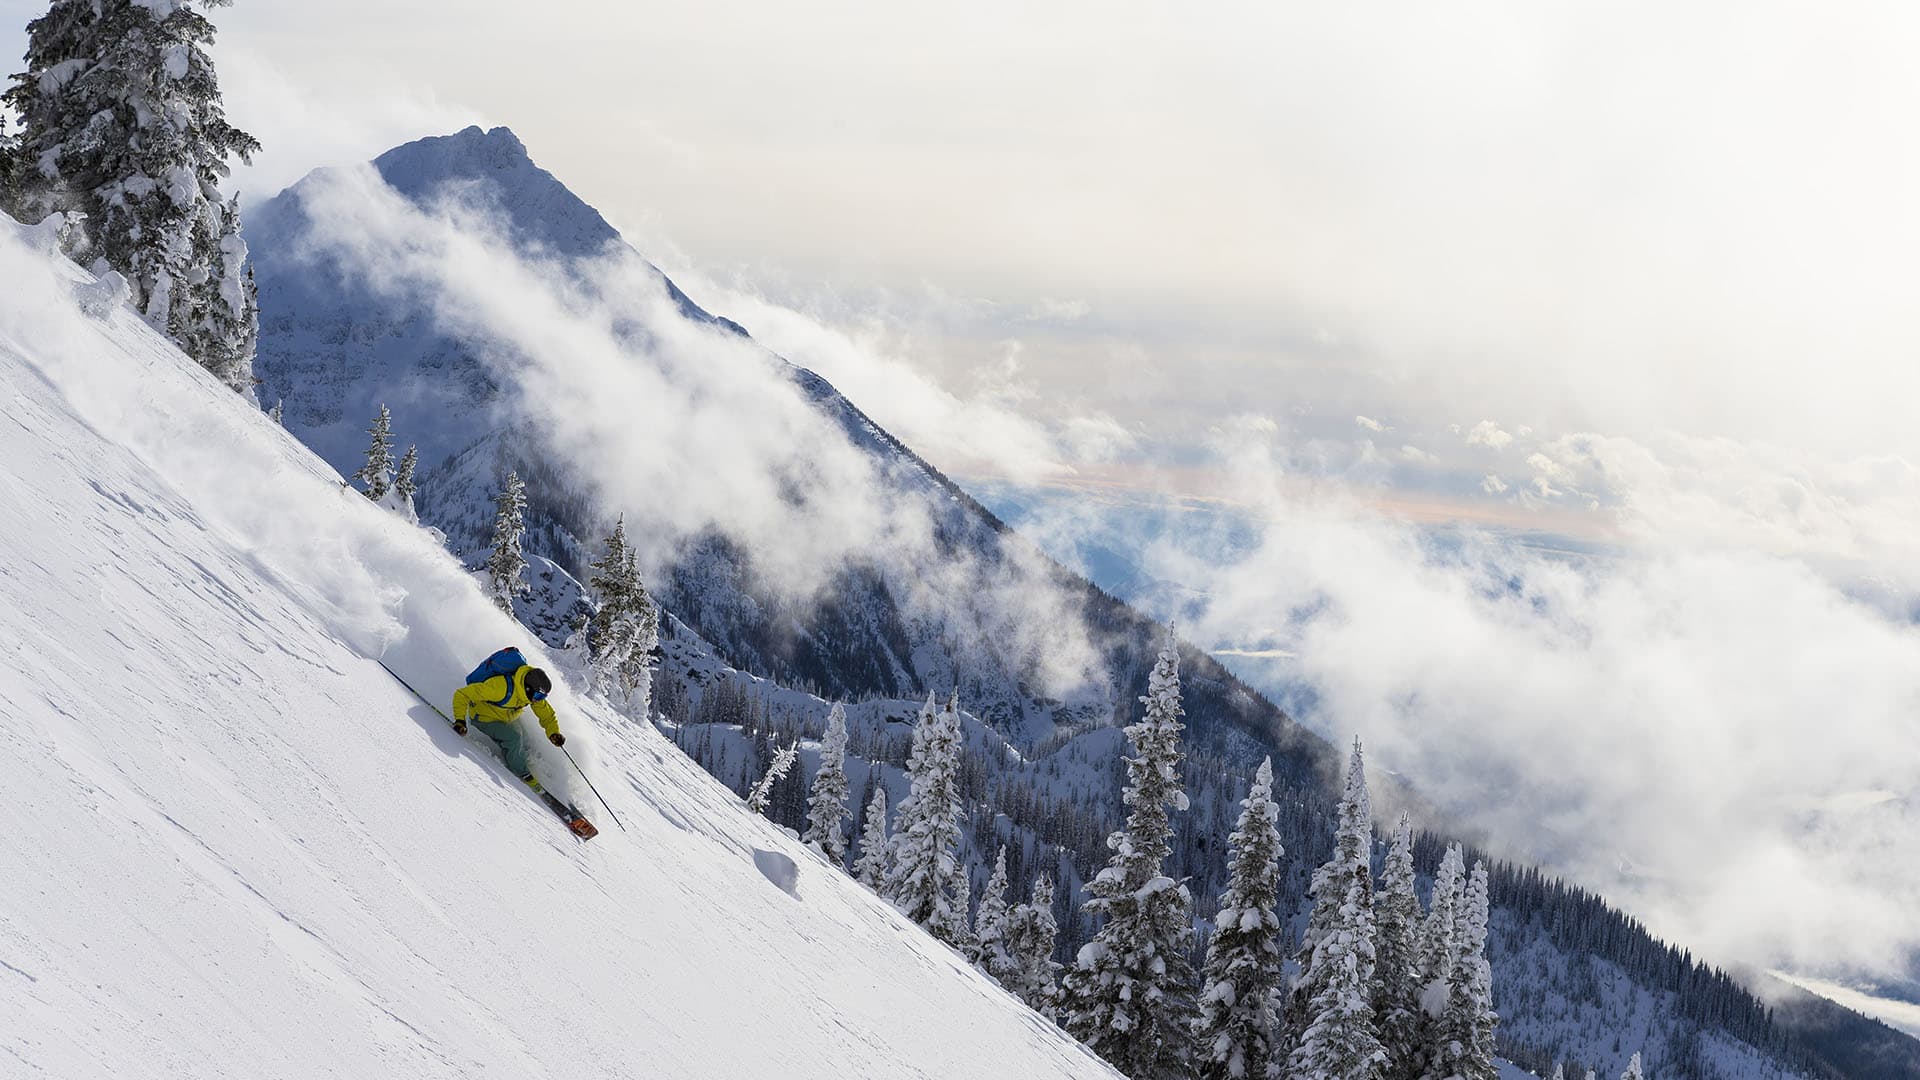 Skiing down a steep run at Revelstoke, which has the highest vertical of any resort in North America